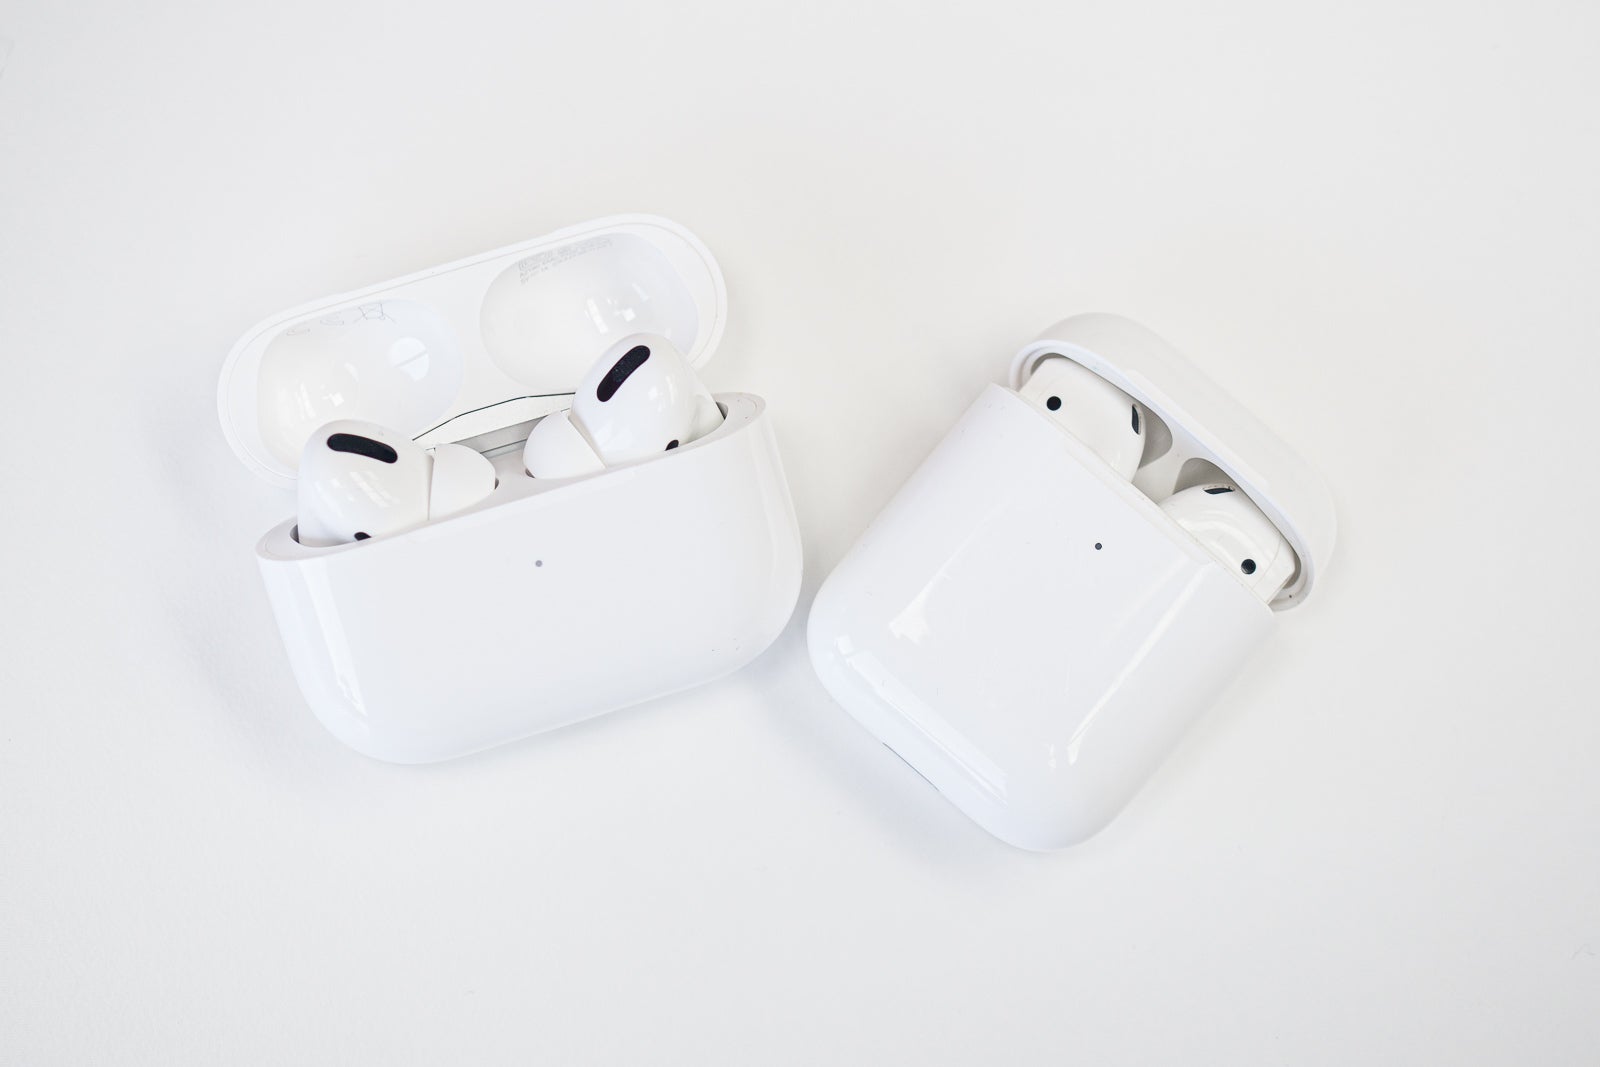 AirPods Pro vs AirPods - Apple AirPods Pro Lite release date, price, features and news